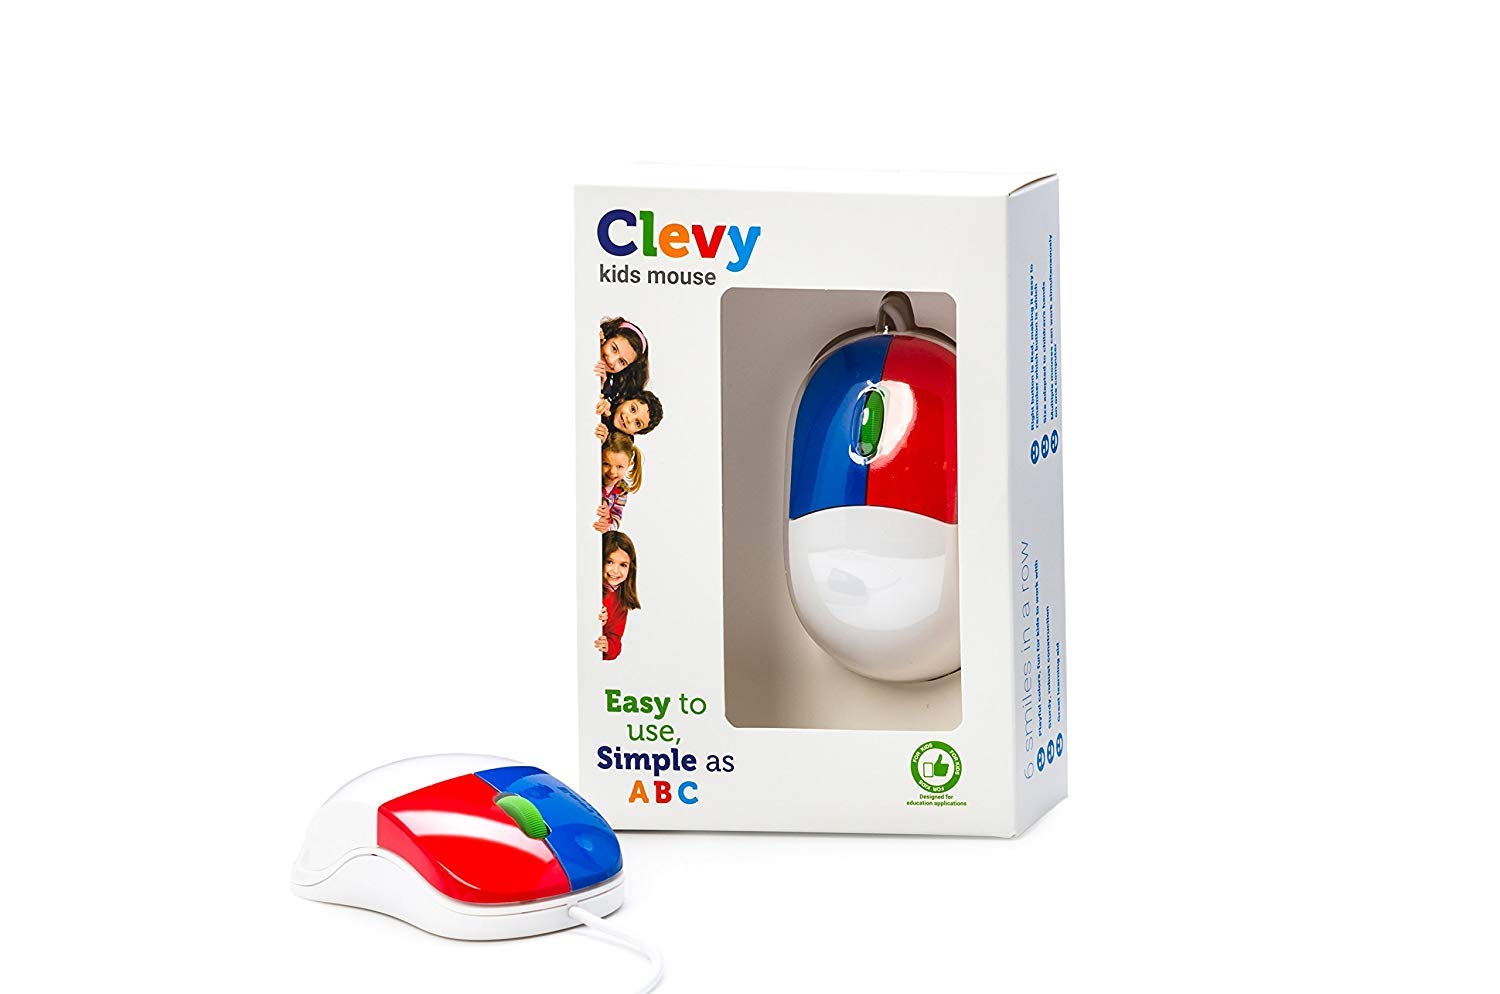 Clevy Bundle Adults/Children: Mouse + Large Print Mechanical Keyboard Spill Proof (Lower Case Color Coded) Matching Mouse Optical Ergonomic USB Easy Slide Design - Compatible with Win & Mac OS